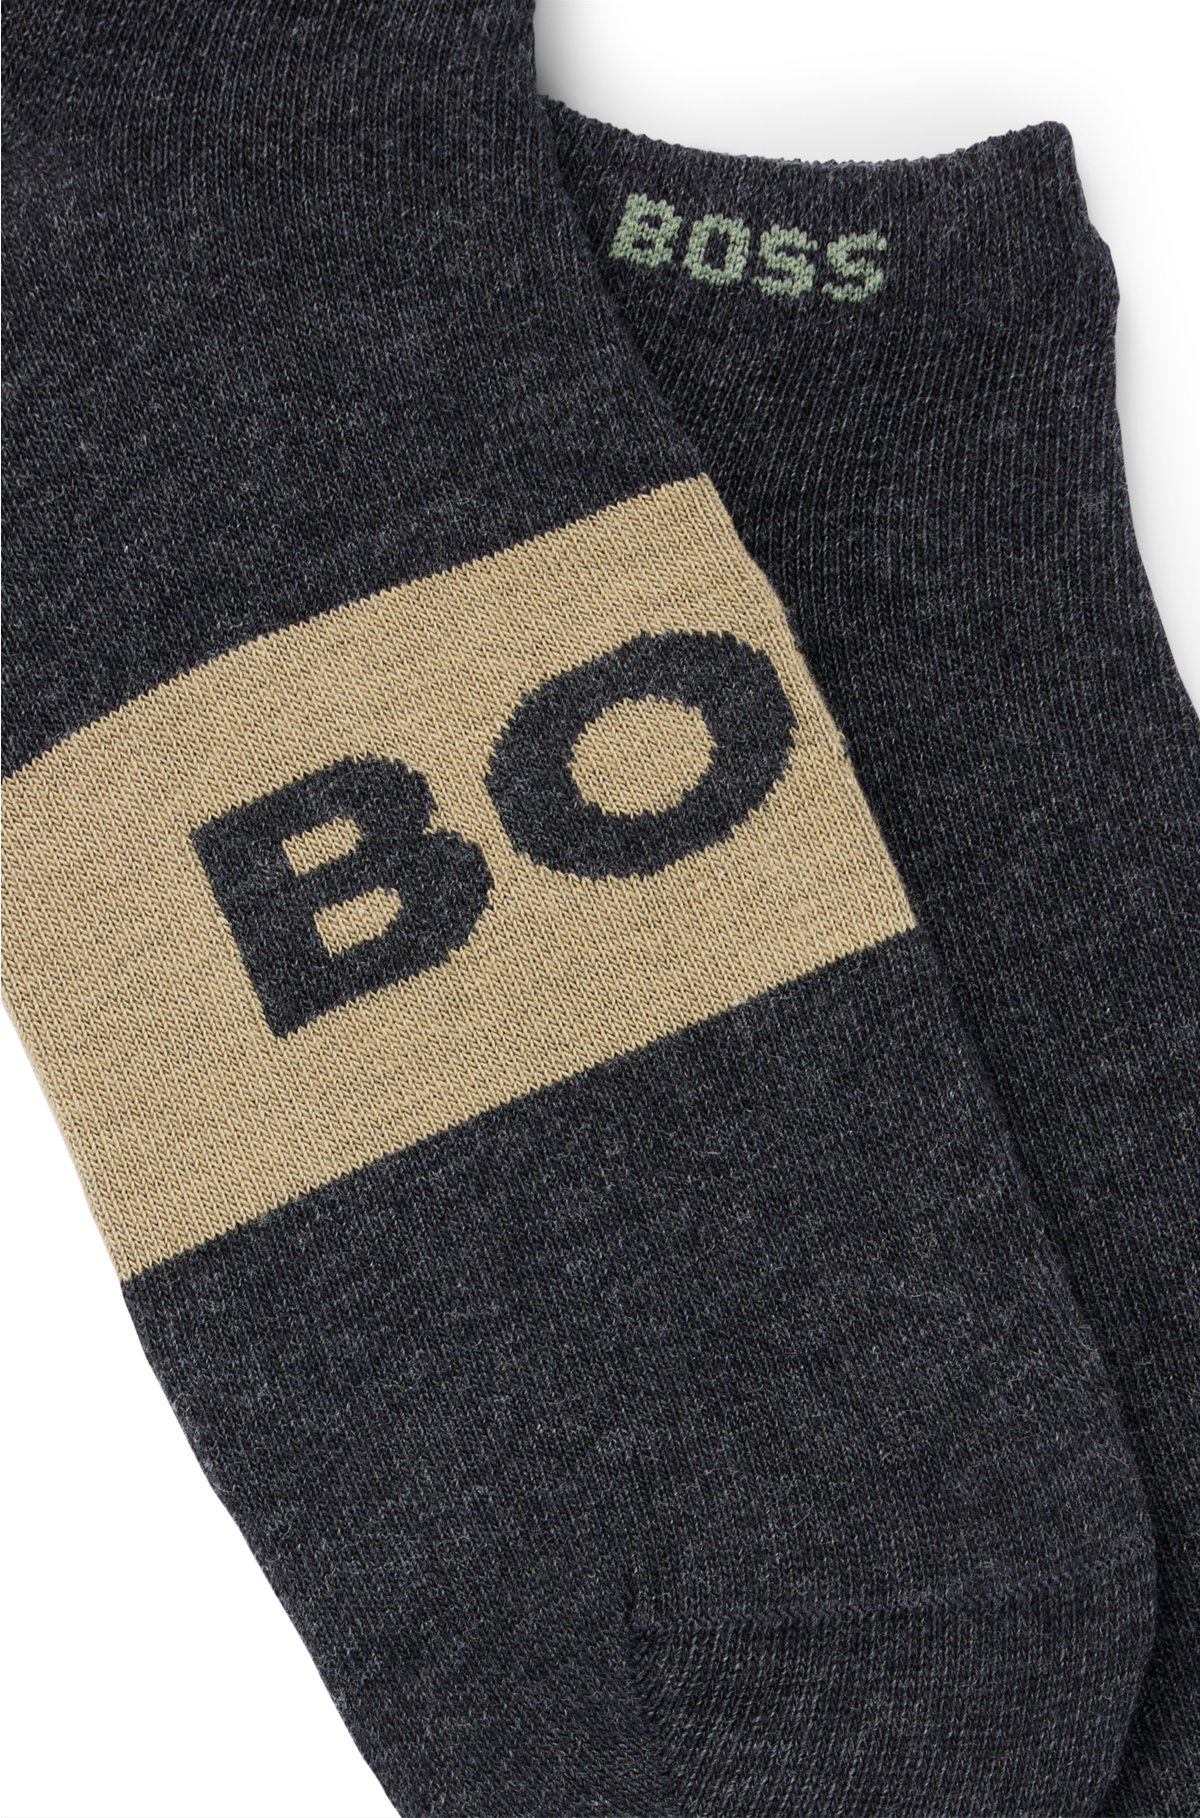 Two-pack of ankle socks in a cotton blend, Dark Grey